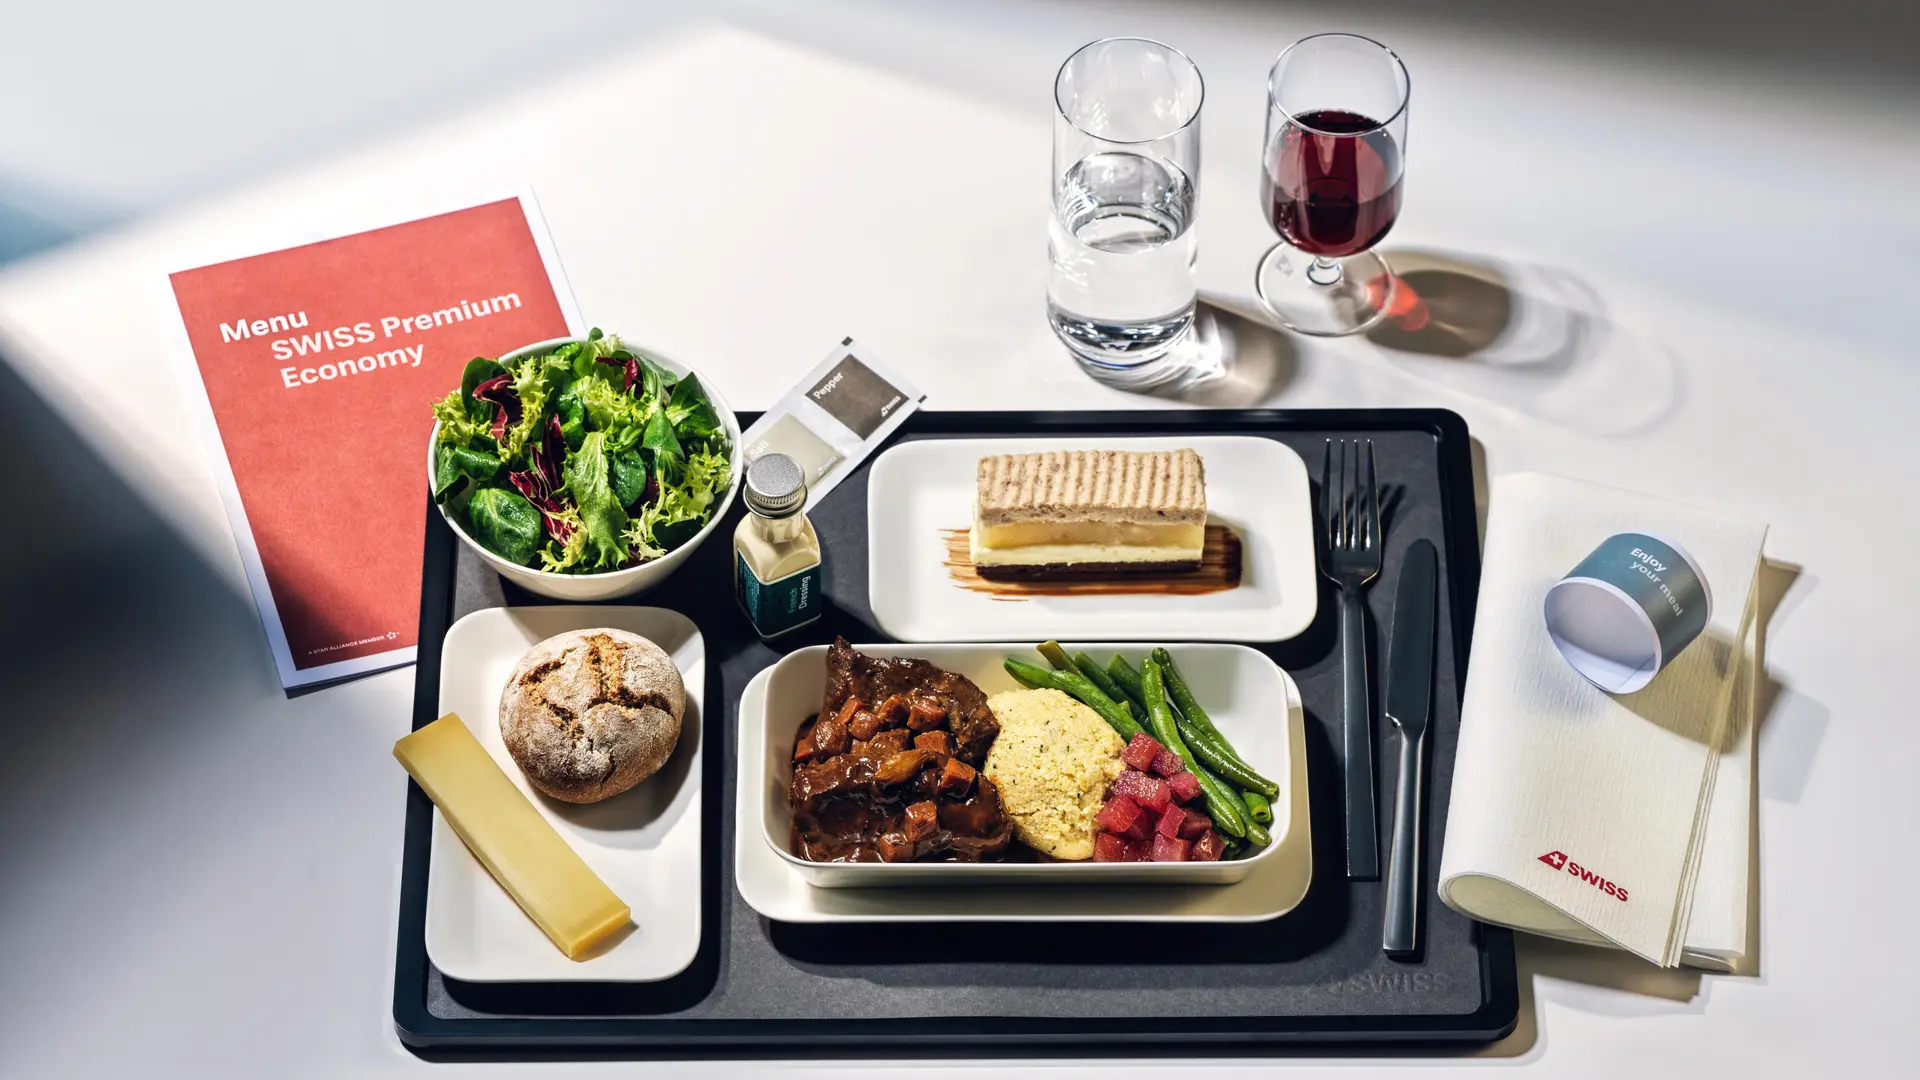 Airlines News - Lufthansa, SWISS and Austrian unveil their new Premium Economy Class